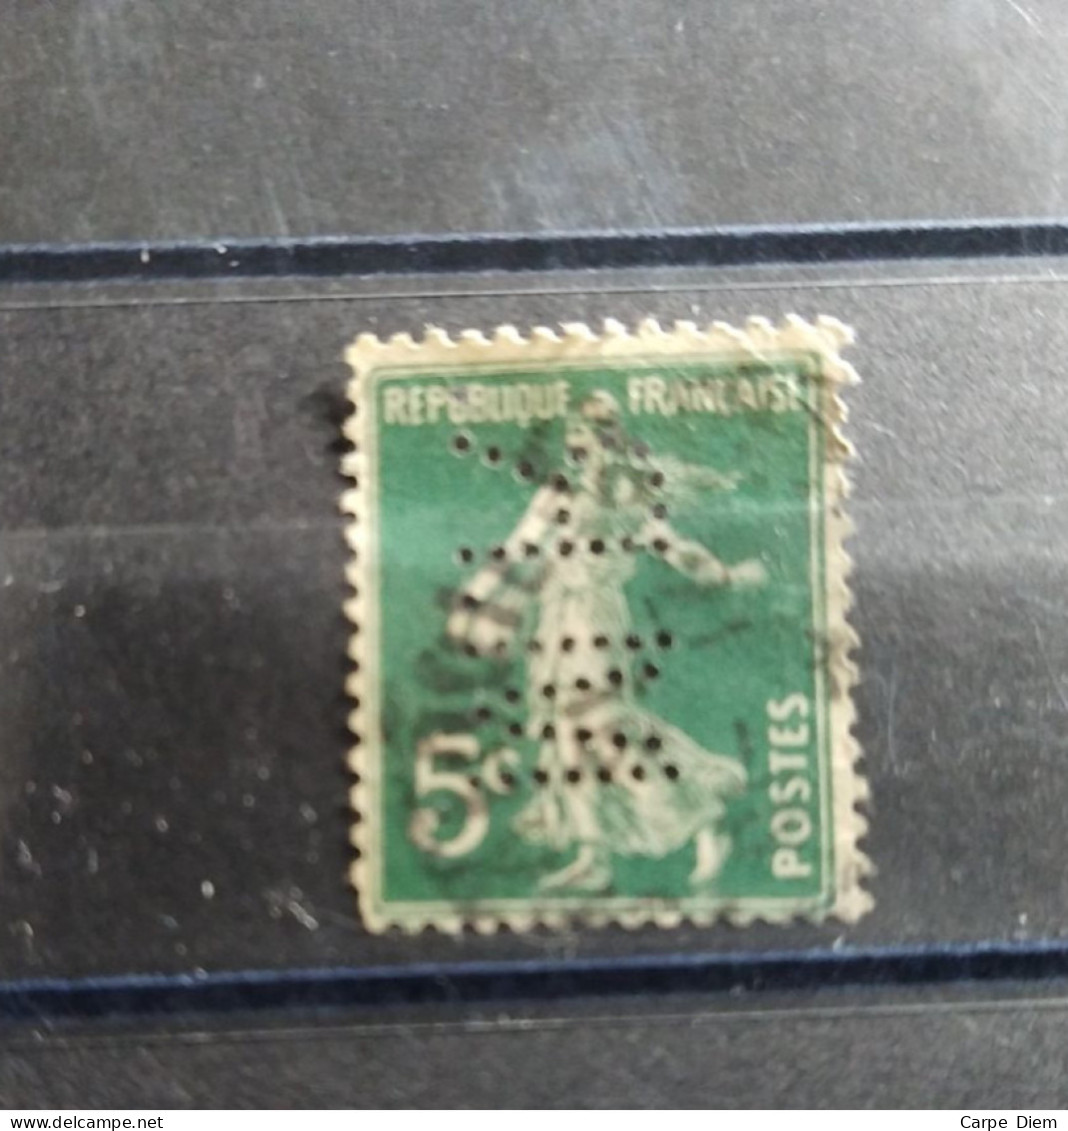 FRANCE M.R.110 TIMBRE MR110 INDICE 6 SUR 137 PERFORE PERFORES PERFIN PERFINS PERFORATION PERCE LOCHUNGG - Used Stamps